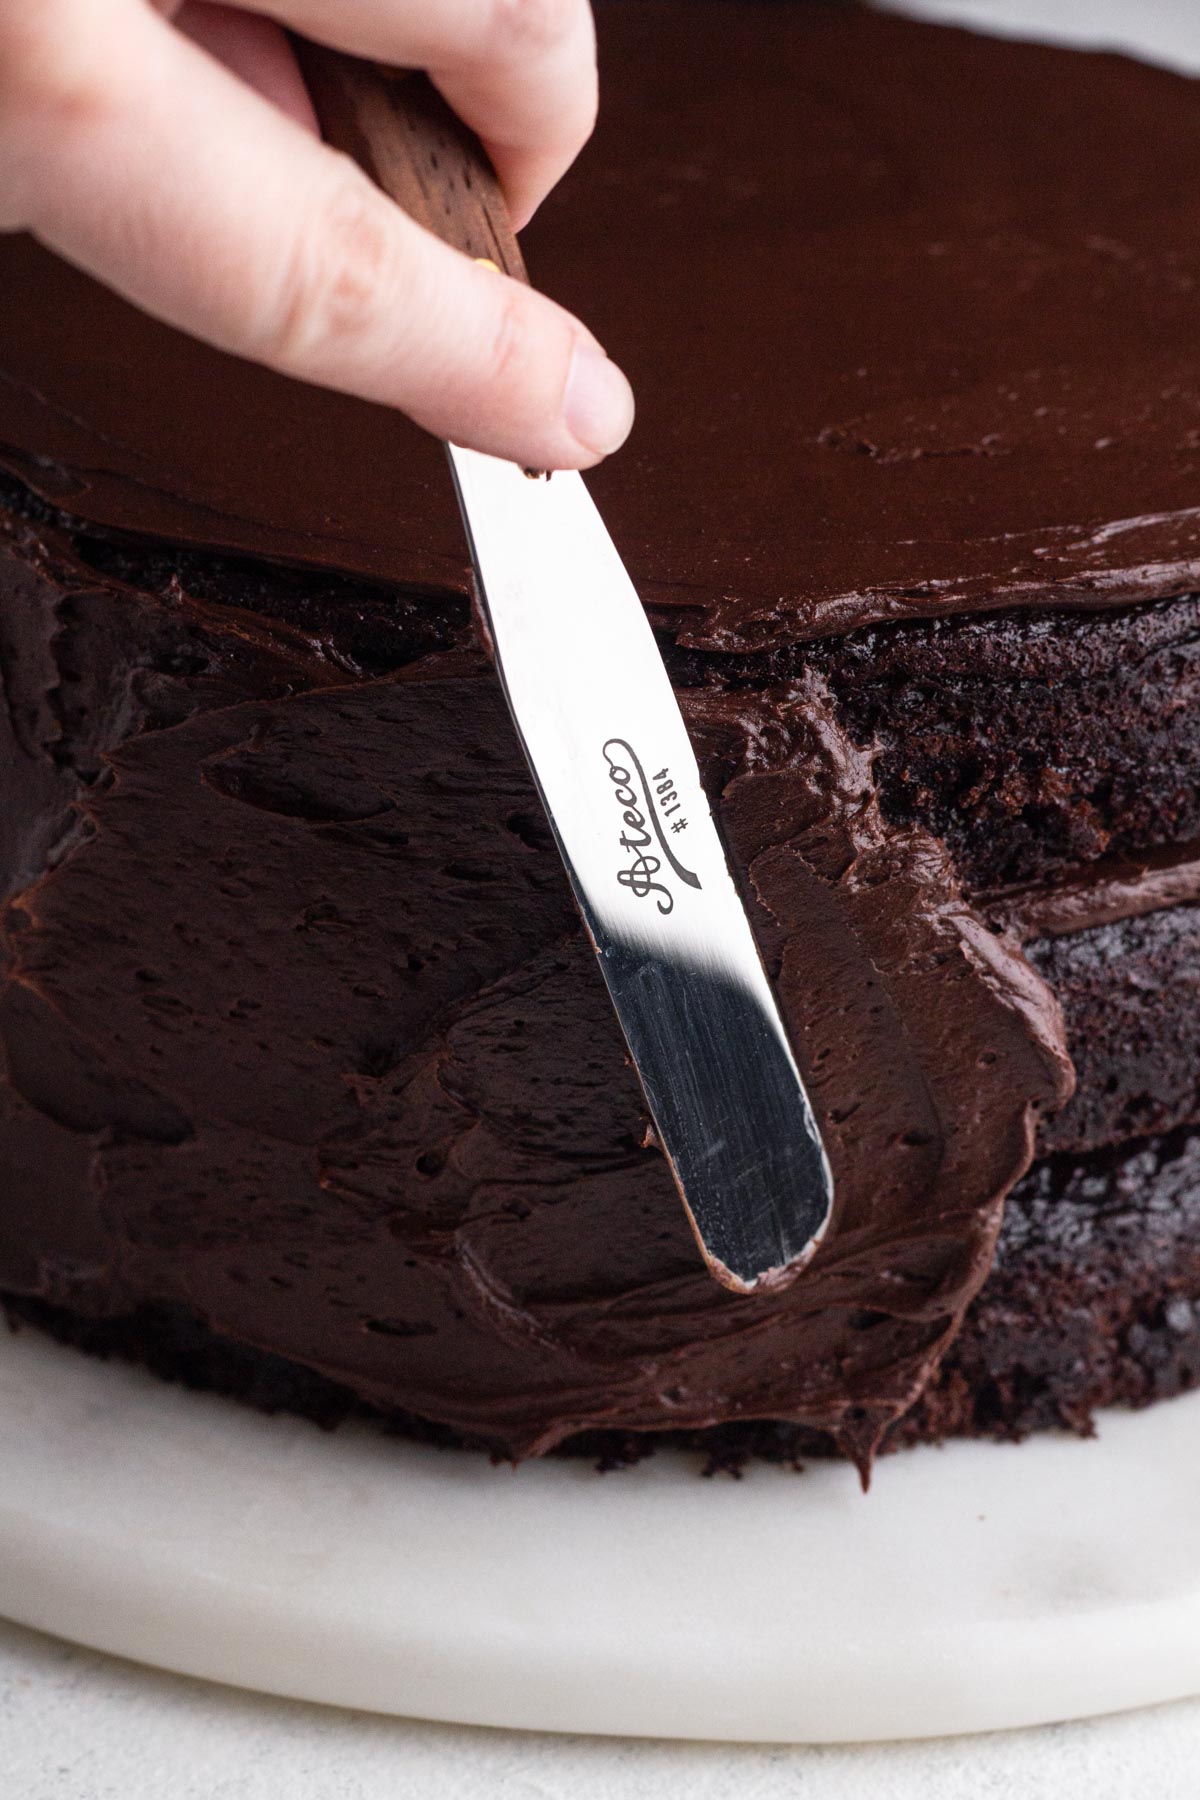 Side view of hand using a spatula to spread dark chocolate frosting along the side of a chocolate layer cake.